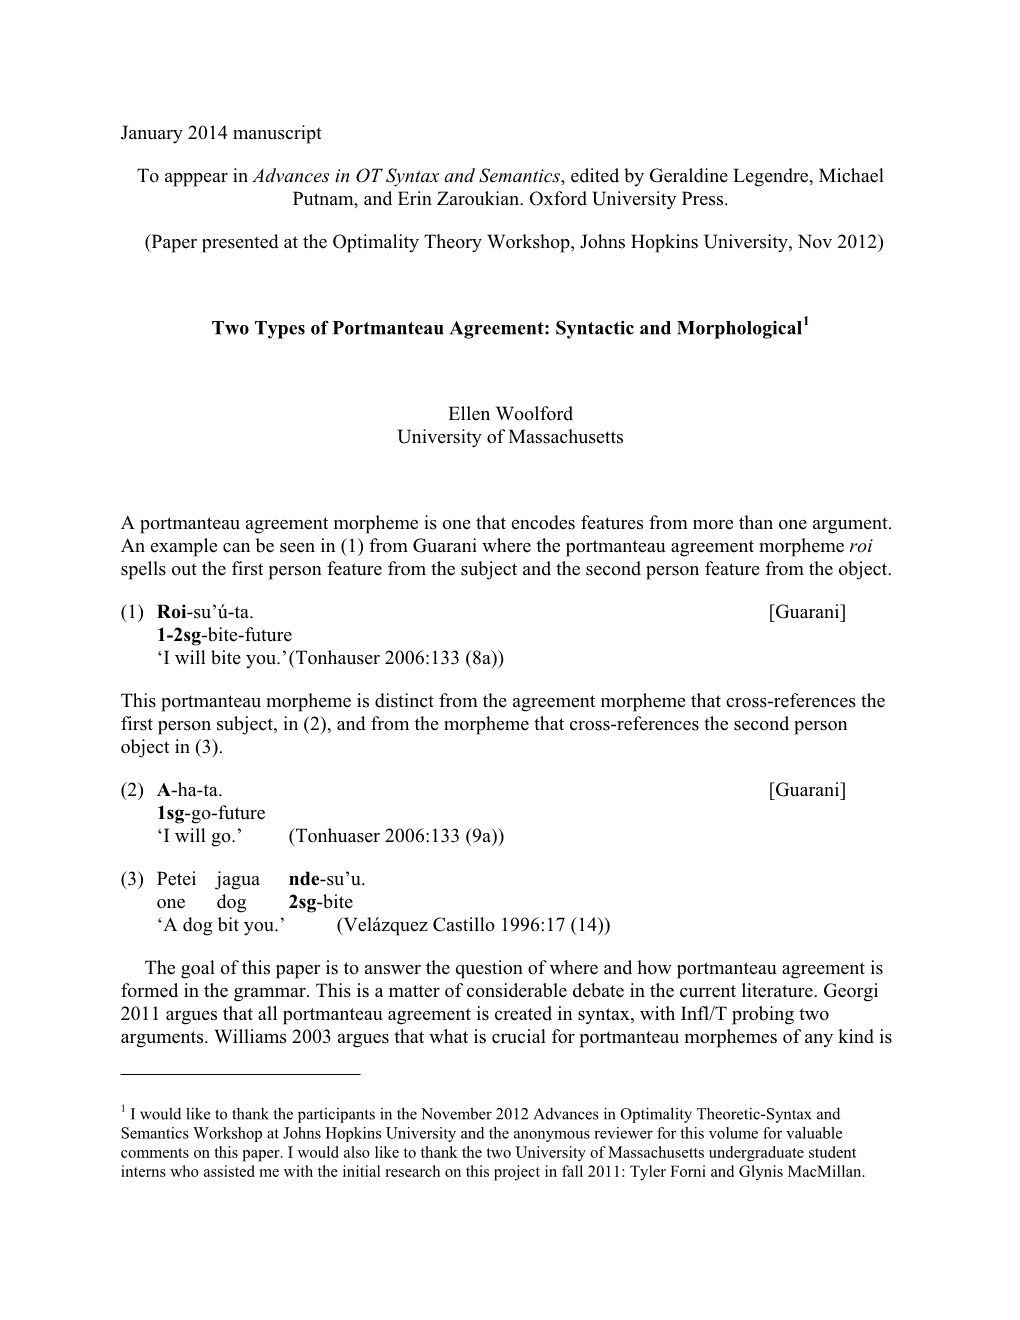 Two Types of Portmanteau Agreement: Syntactic and Morphological1